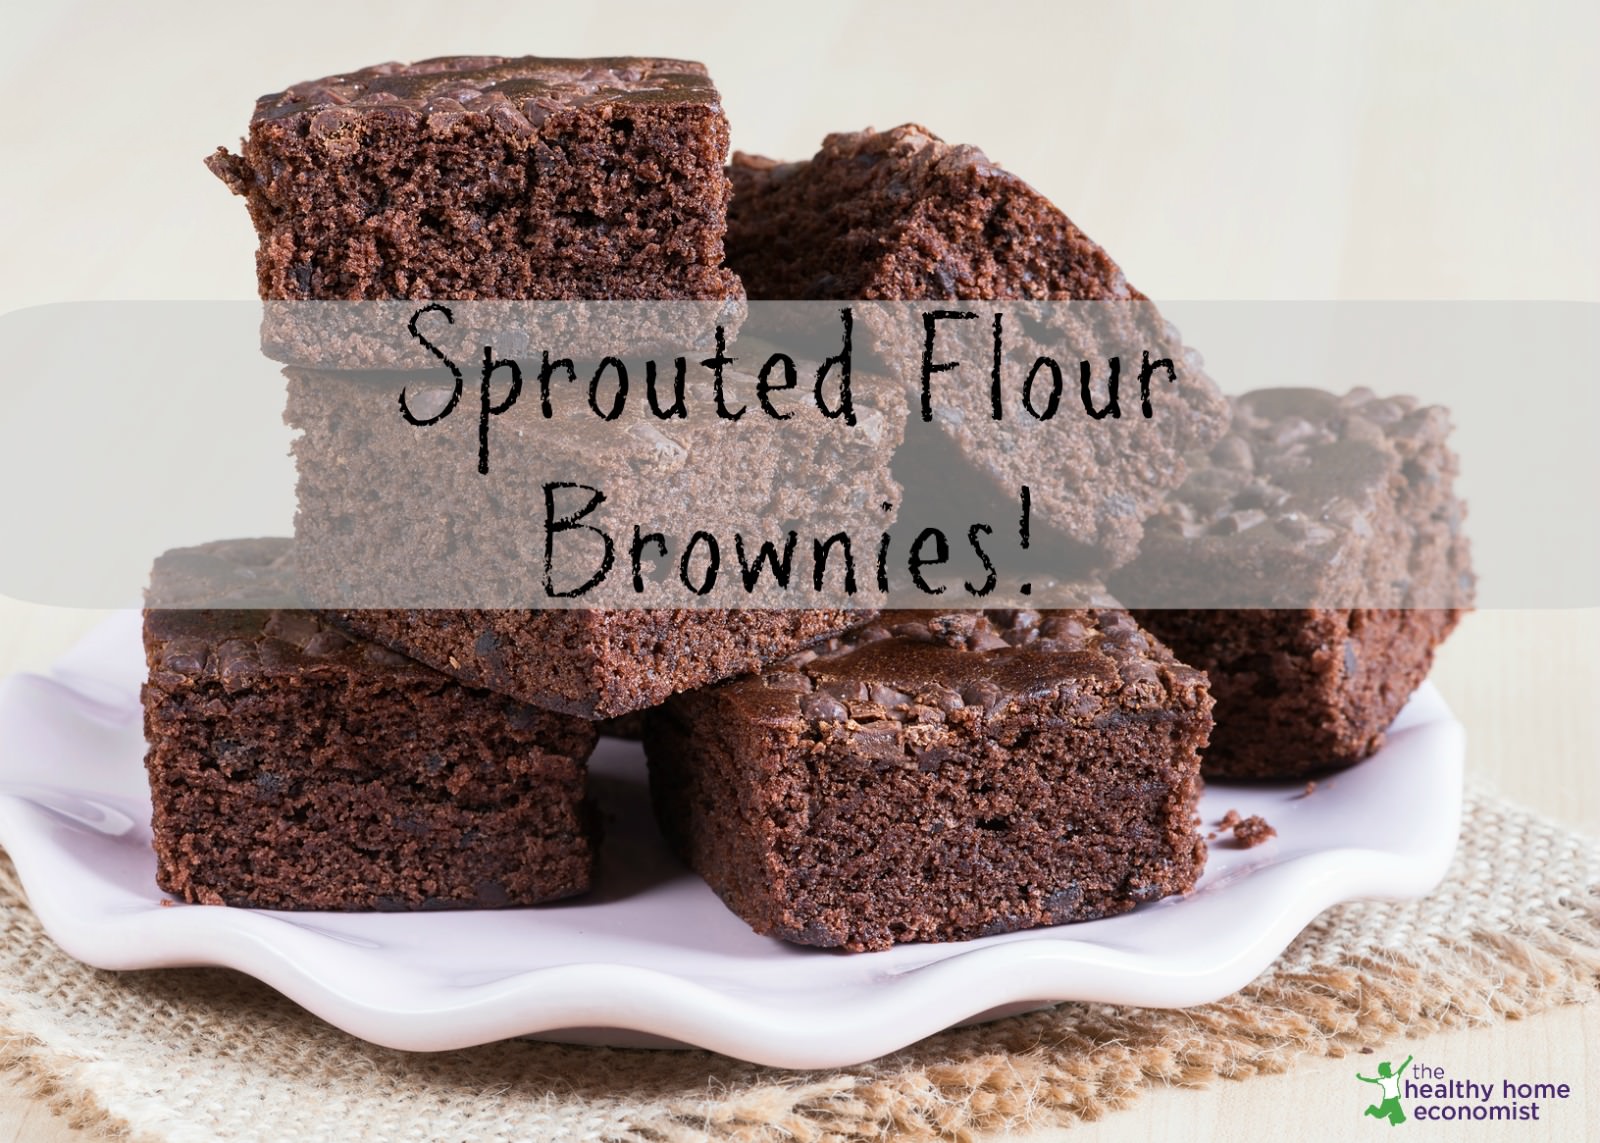 sprouted flour brownies stacked on a white plate